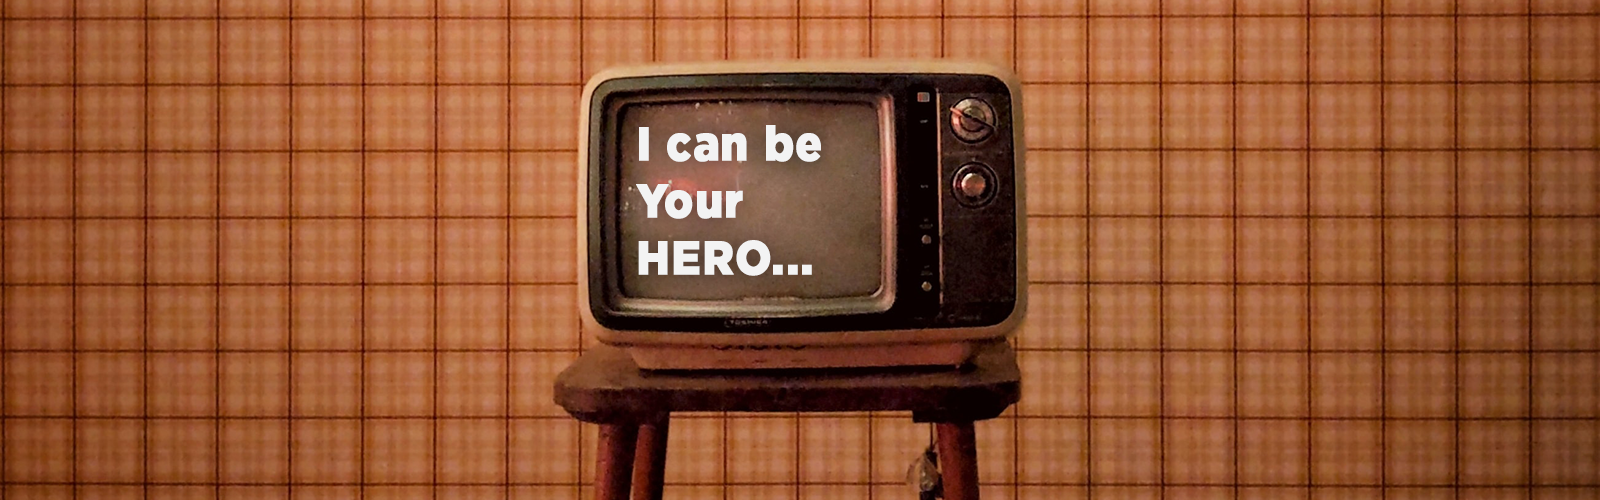 hero-image-tips-and-tricks-an-old-tv